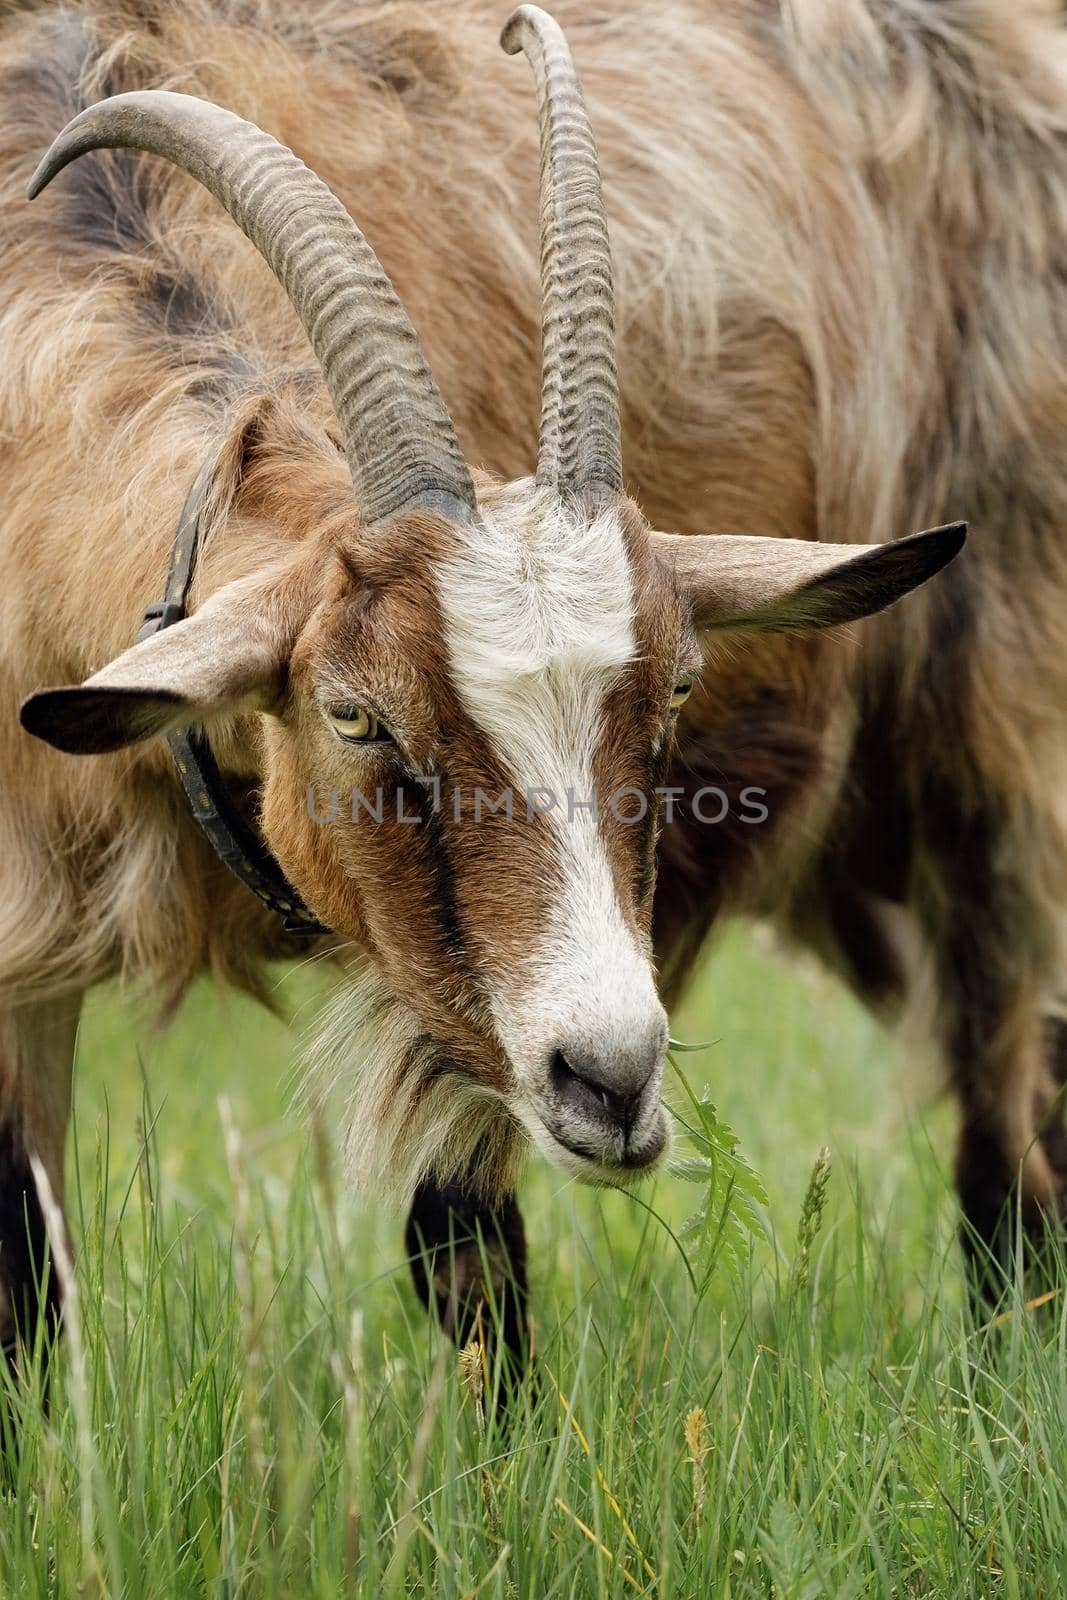 Large goat with long horns approached menacingly towards the photo camera by Lincikas